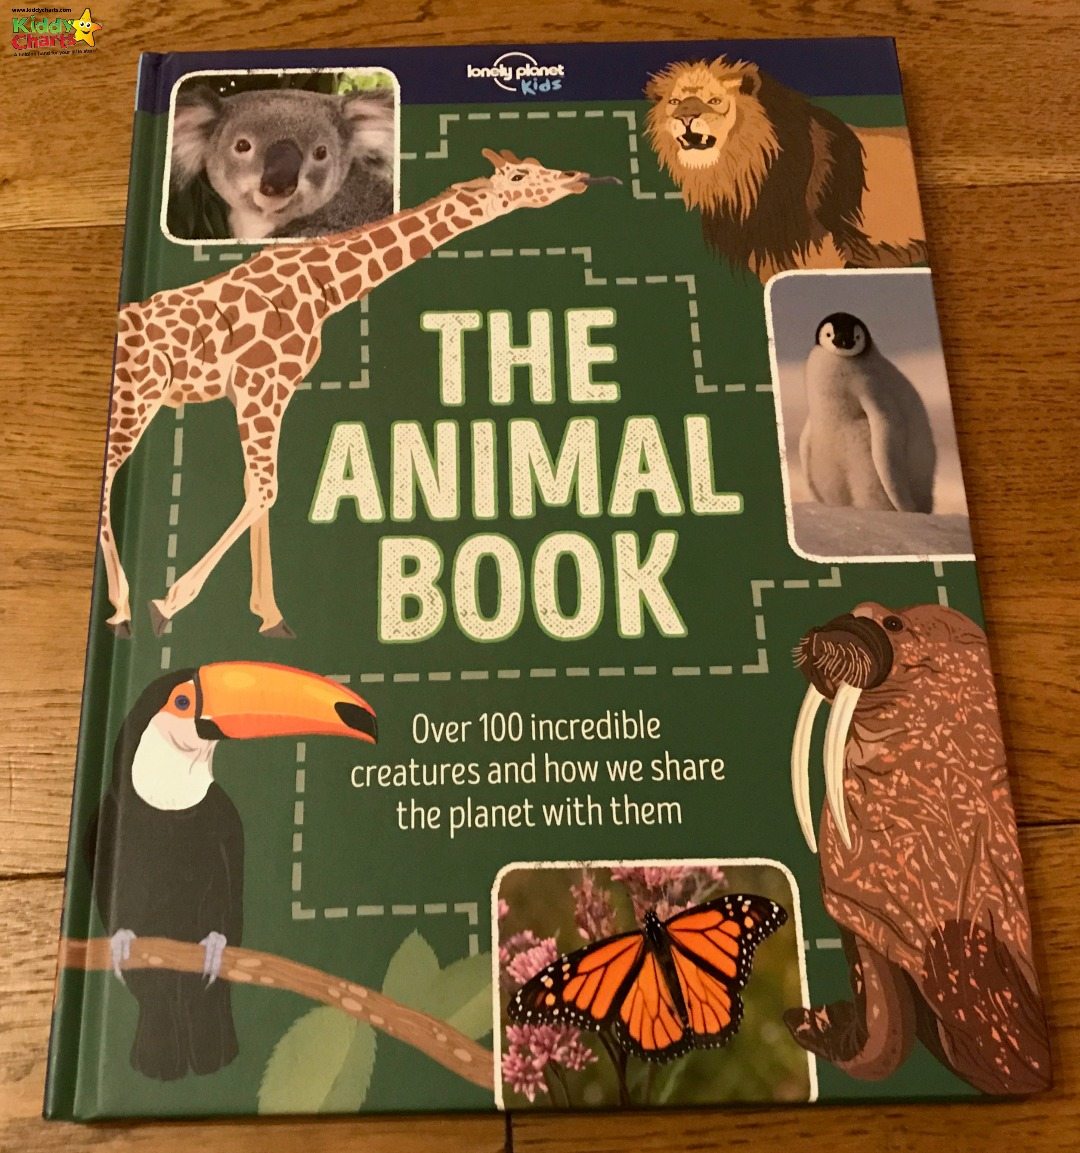 The Animal Book is the first of our Lonely PLanet Kids book reviews - and fantastic resource for your kids, no matter what animals they love!